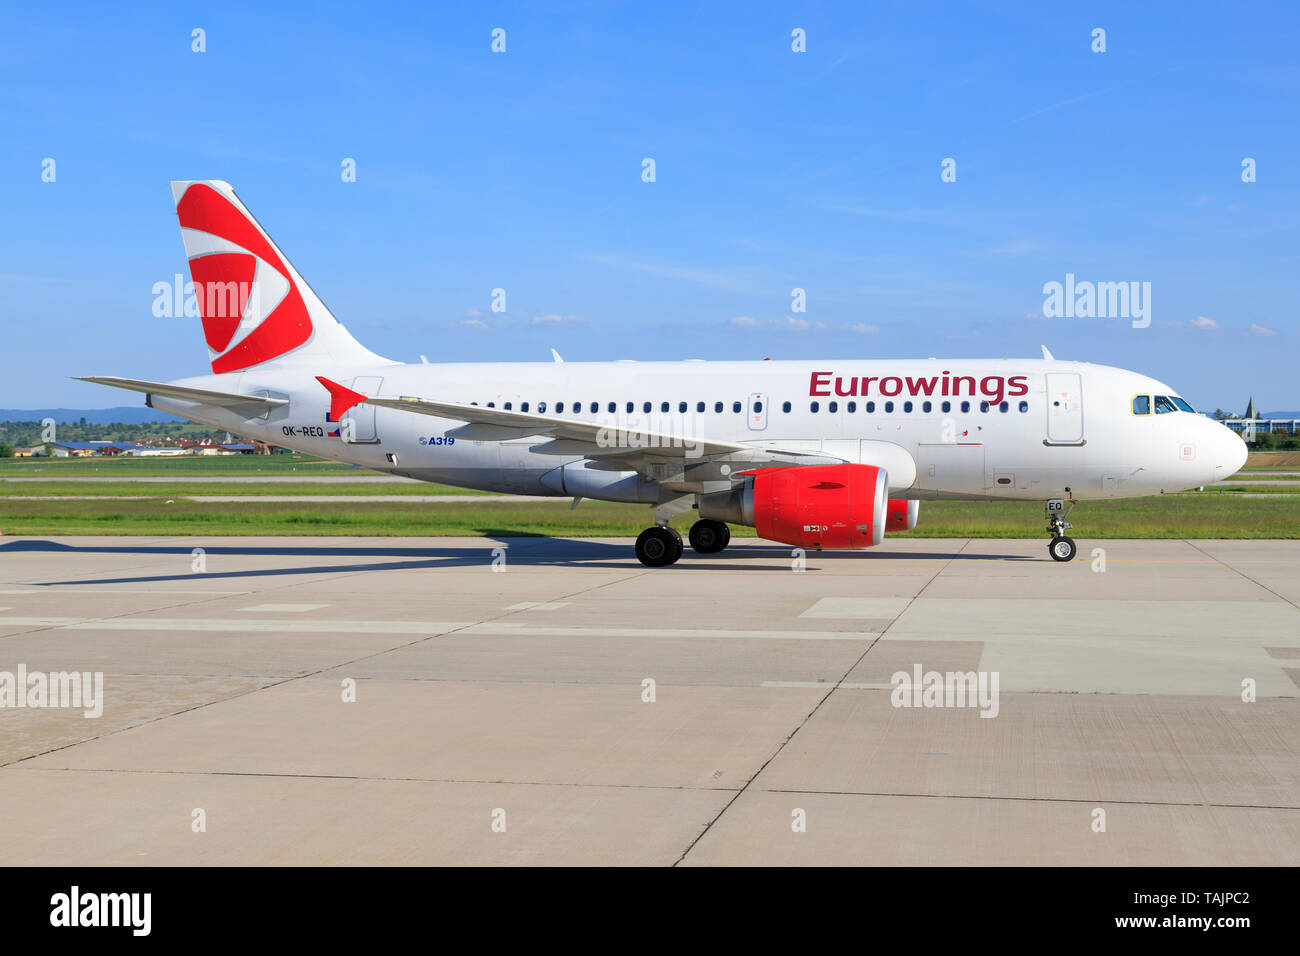 Stuttgart/Germany August 22, 2019:  Eurowings Airbus A320-214 at Stuttgart Airport. Stock Photo